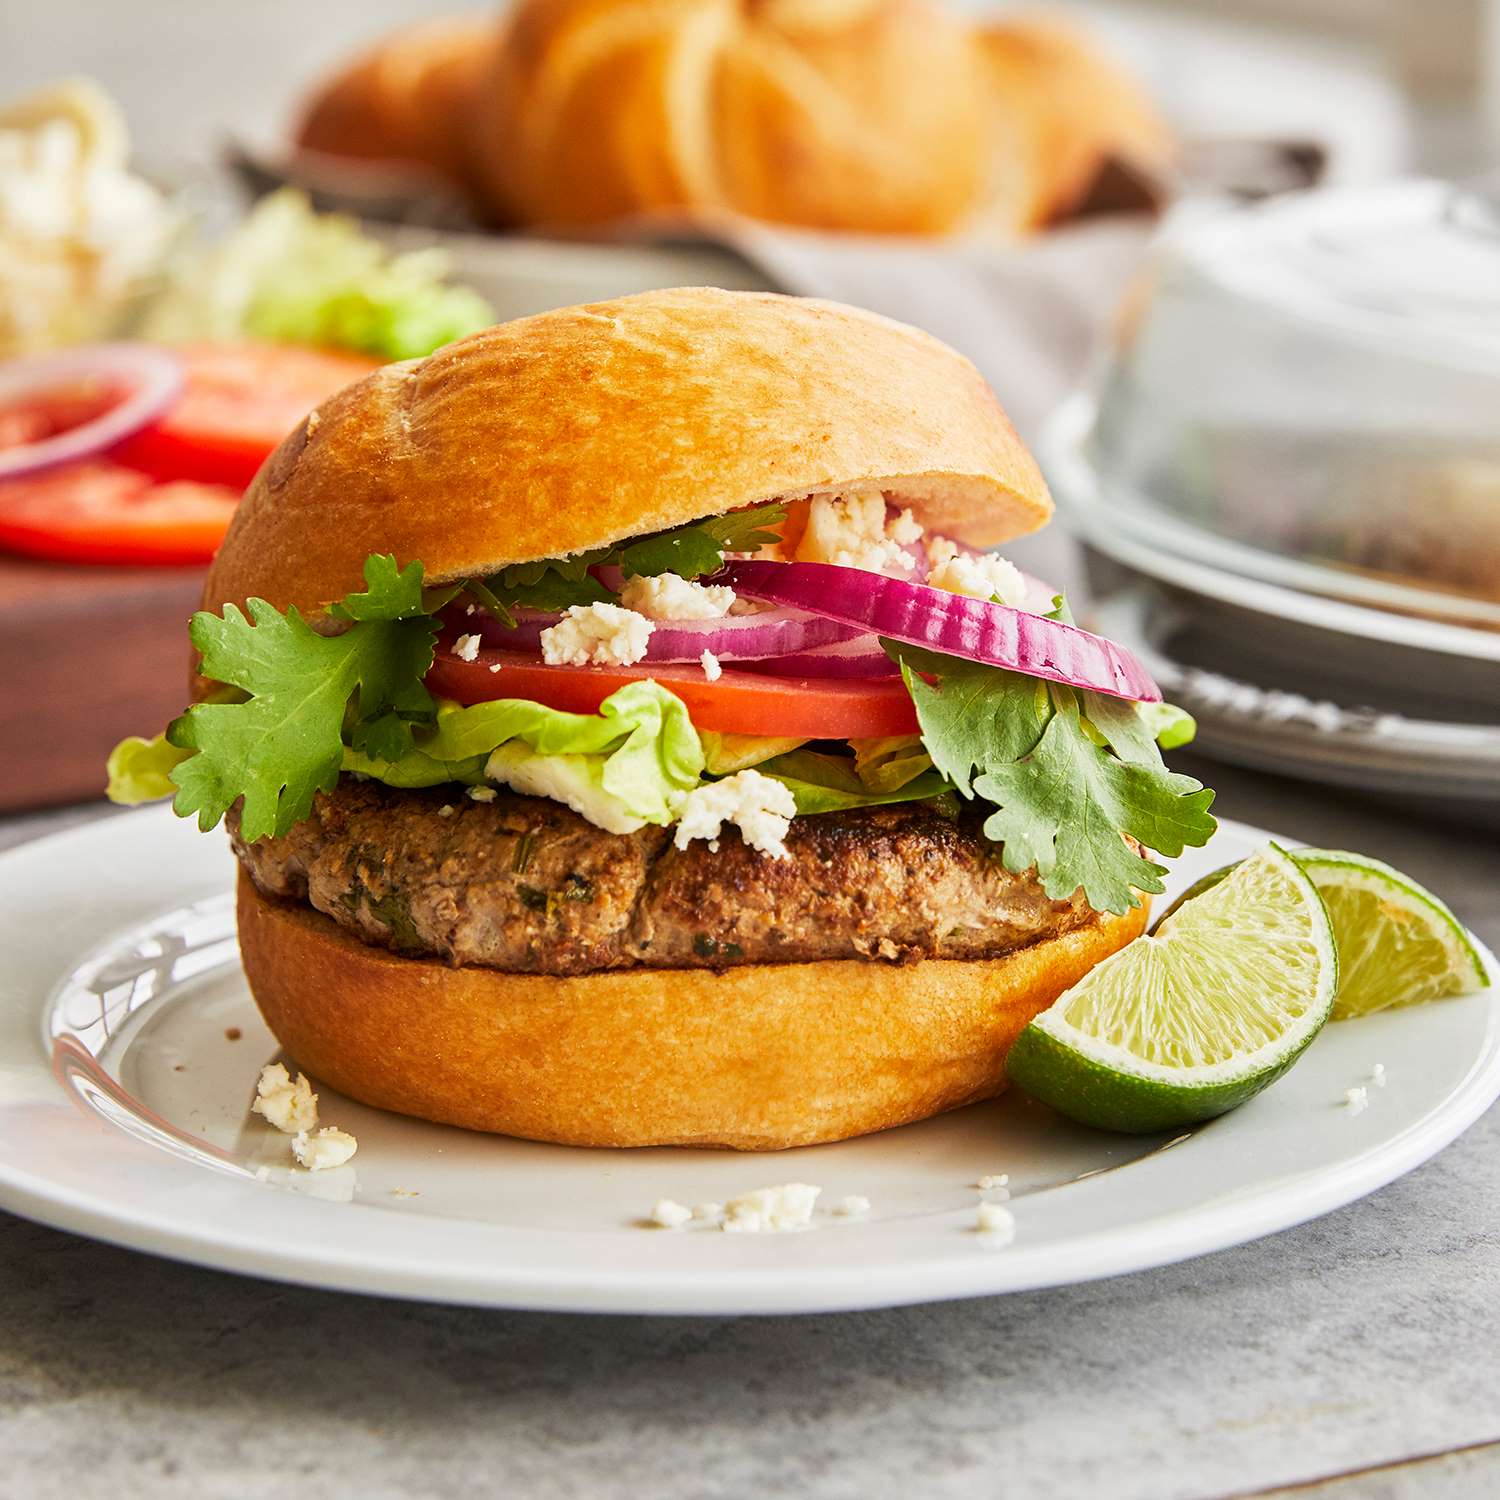 recipes with lime, lime recipes, turkey burger recipes